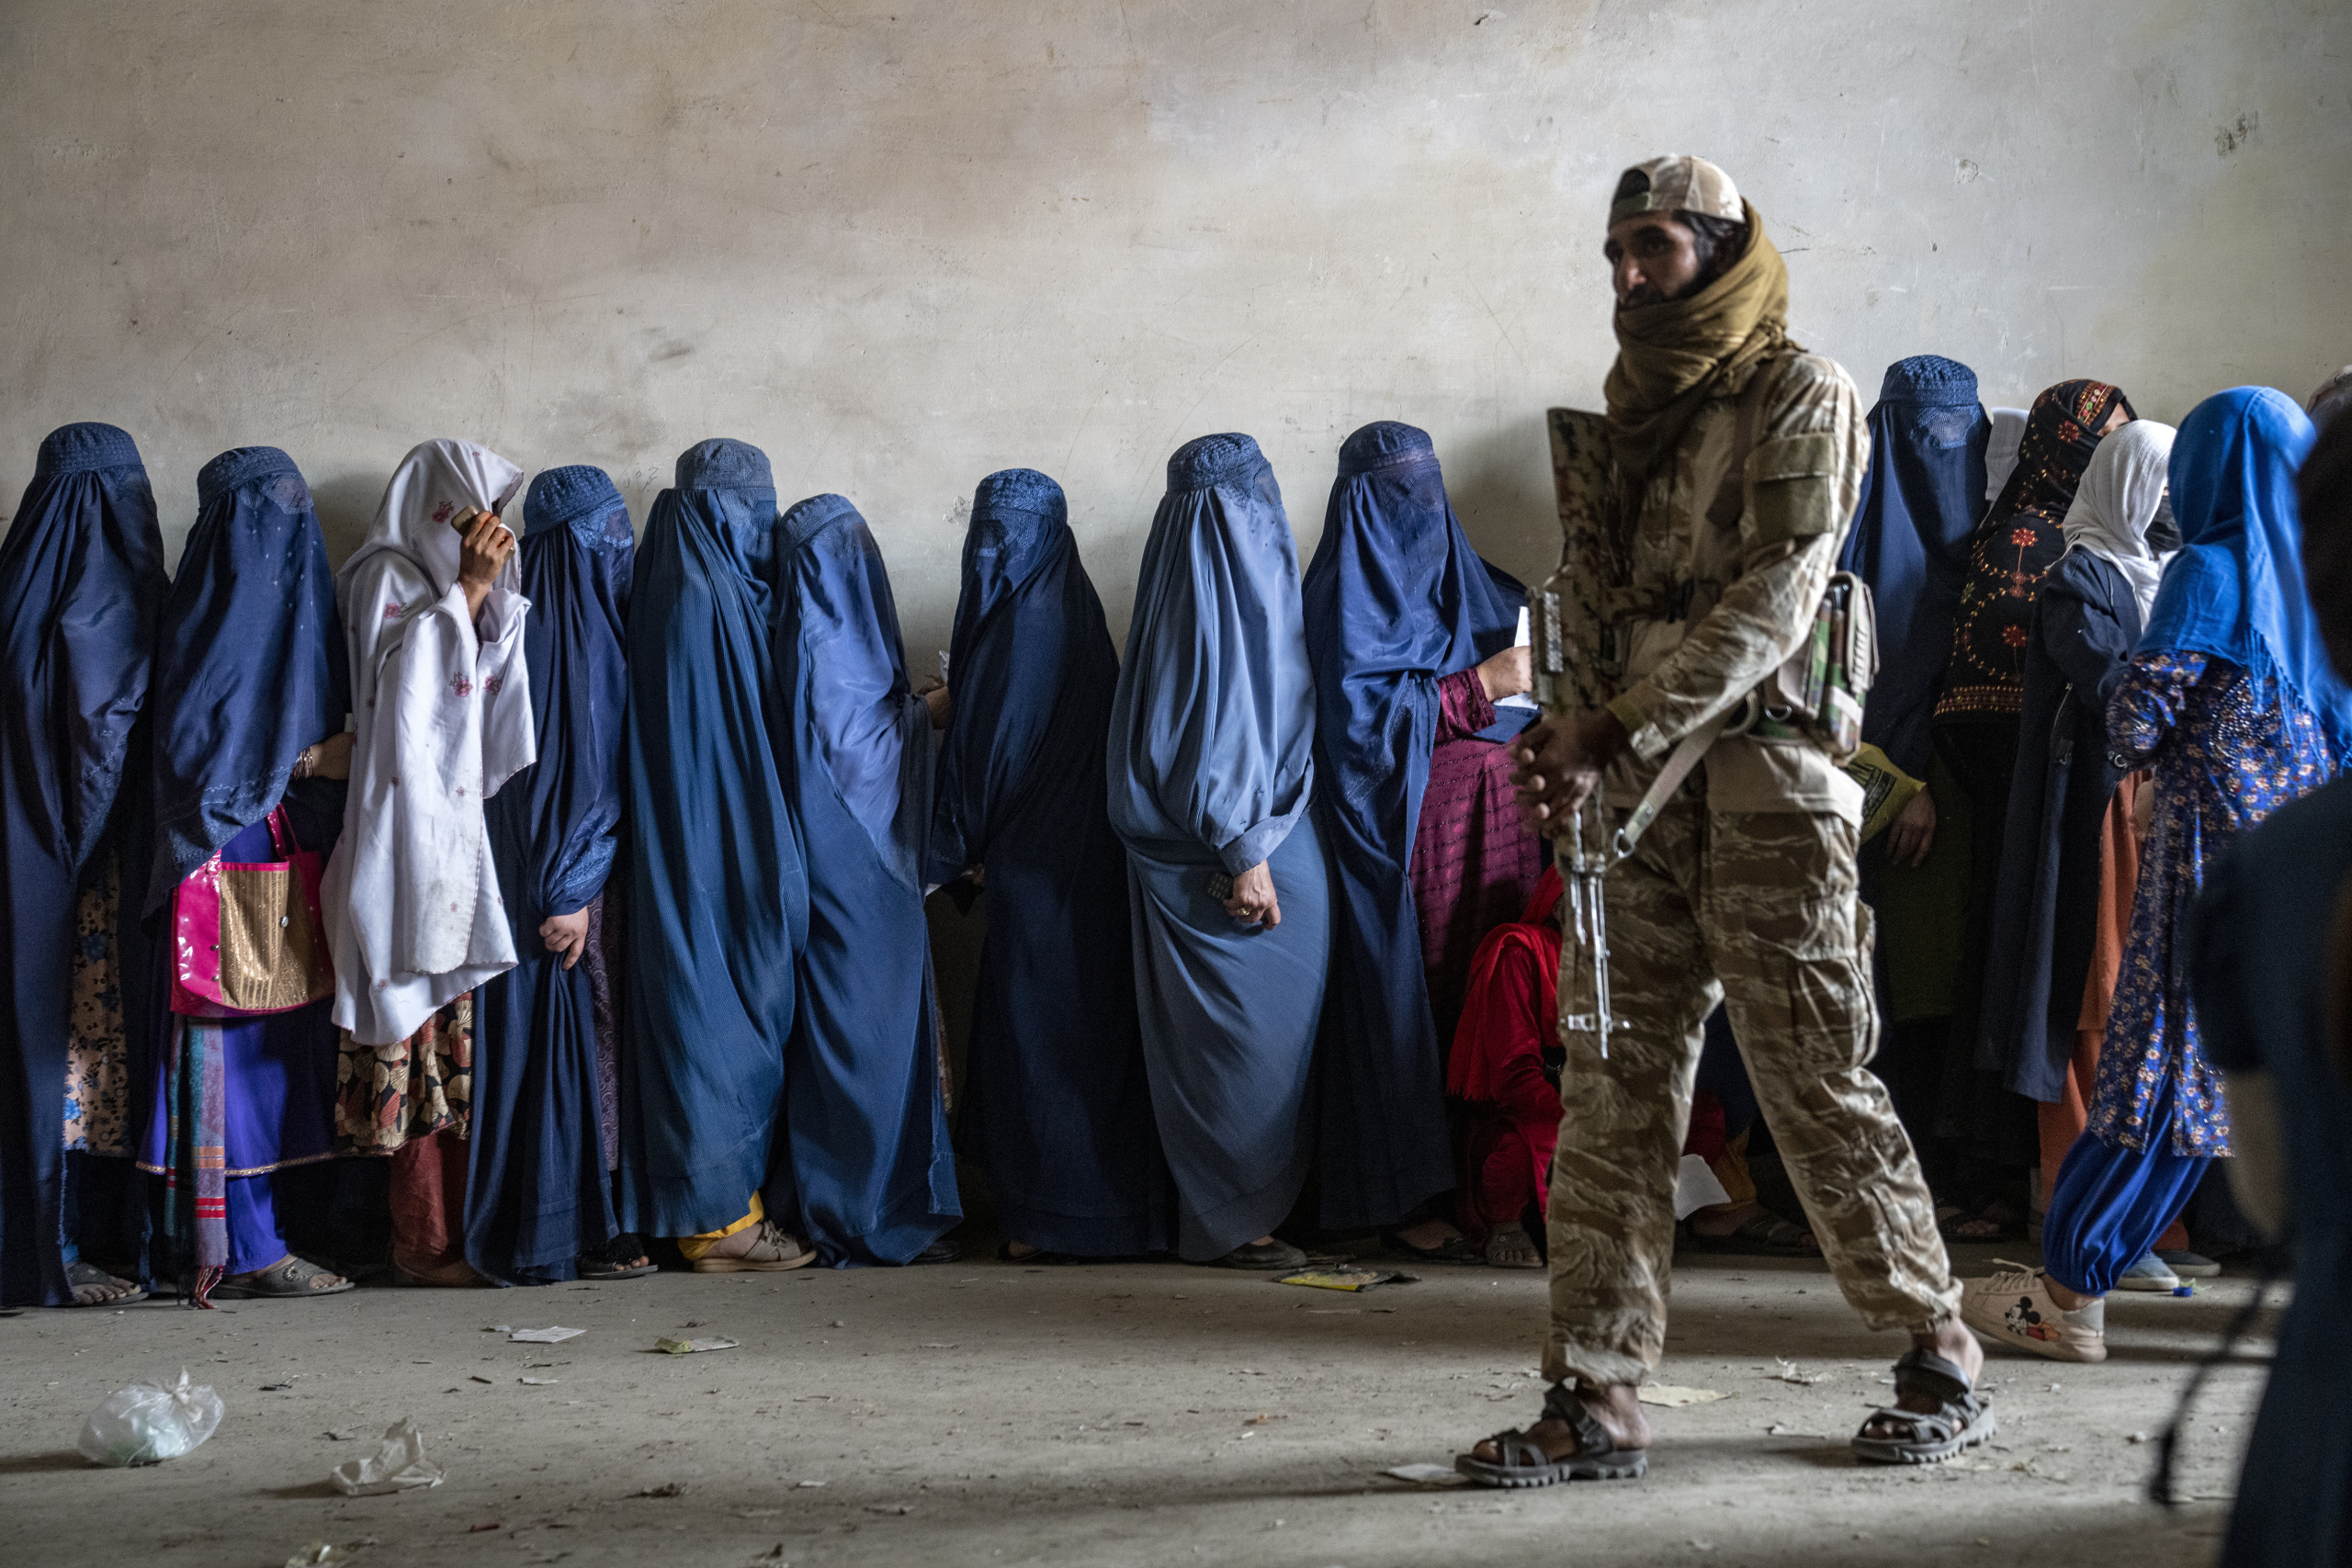 A Taliban fighter stands guard as women wait to receive food rations distributed by a humanitarian aid group, in Kabul, Afghanistan, on May 23, 2023. (AP Photo/Ebrahim Noroozi)

Associated Press/LaPresse
Only Italy and Spain